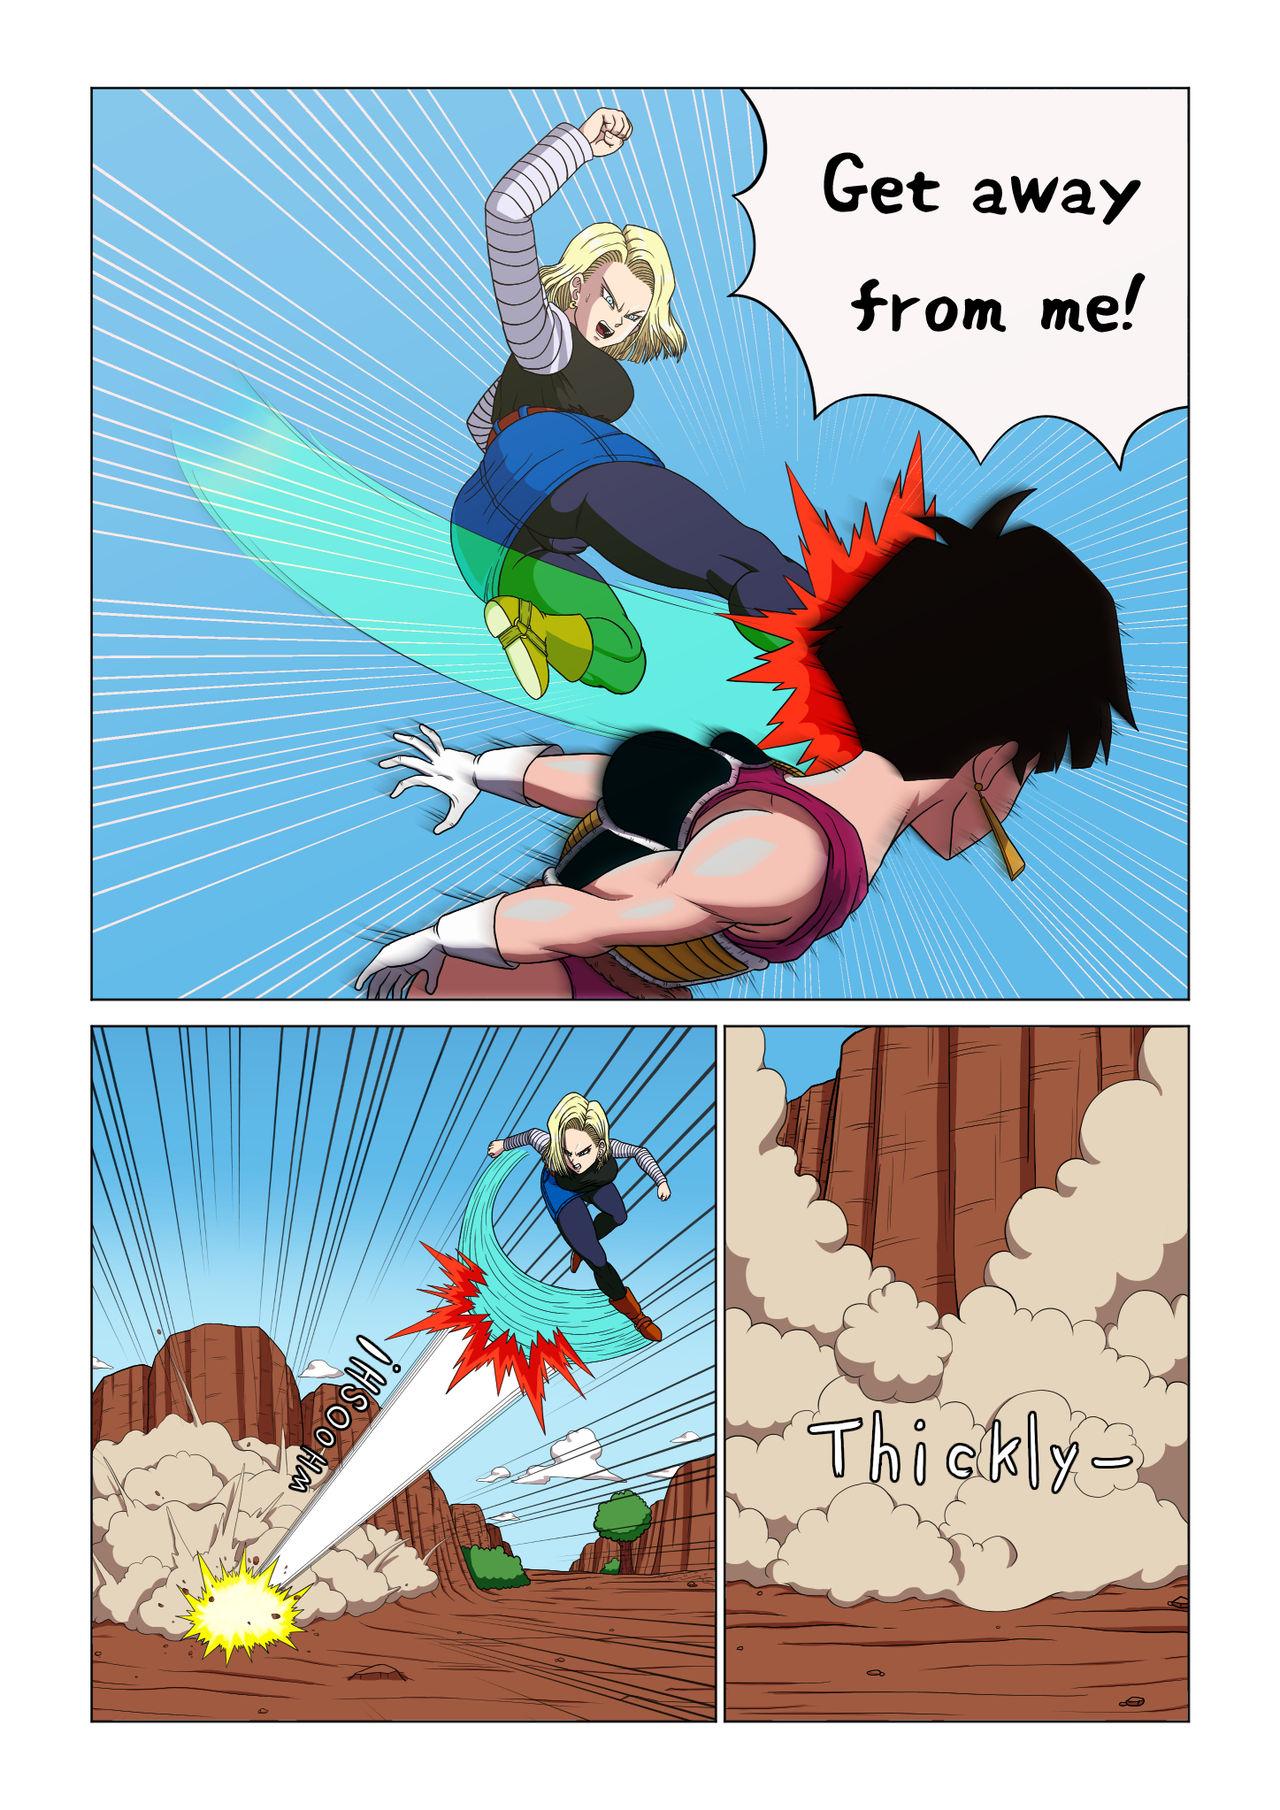 Android 18 vs Baby 3